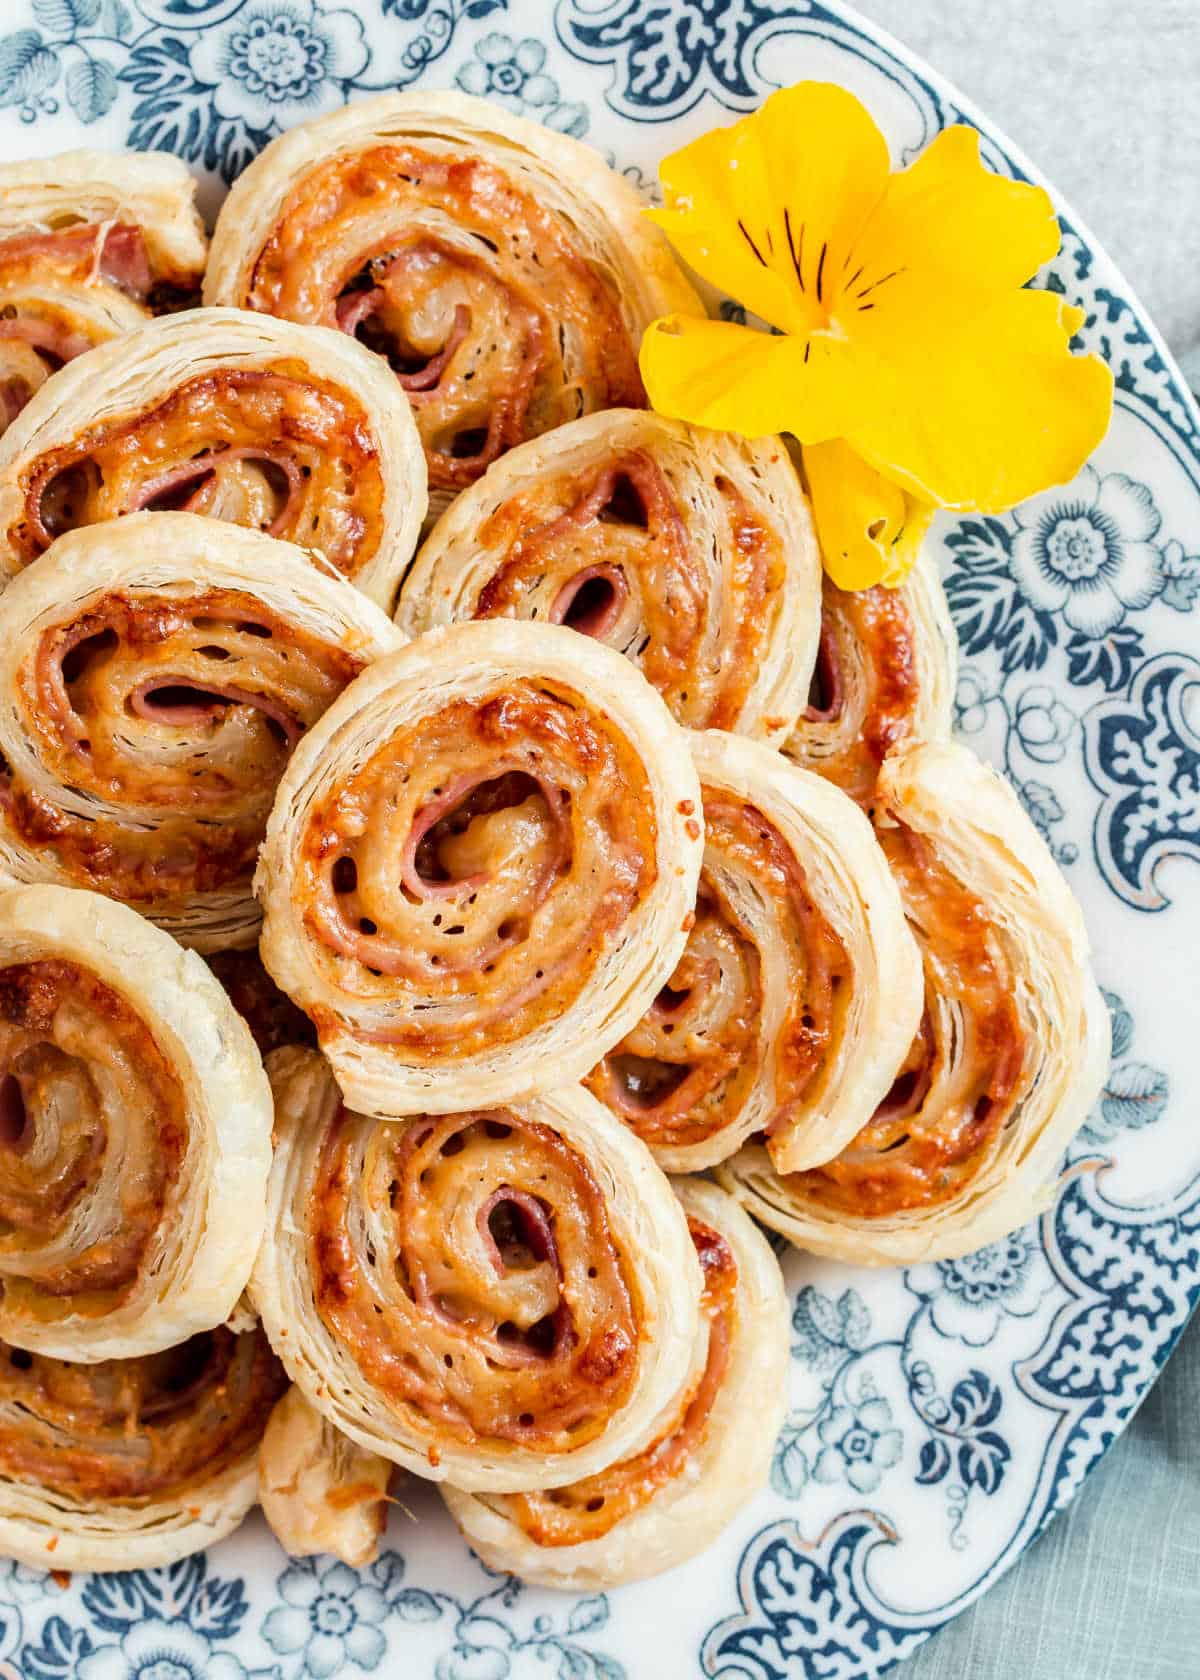 ham and cheese puff pastry pinwheels on blue floral plate.